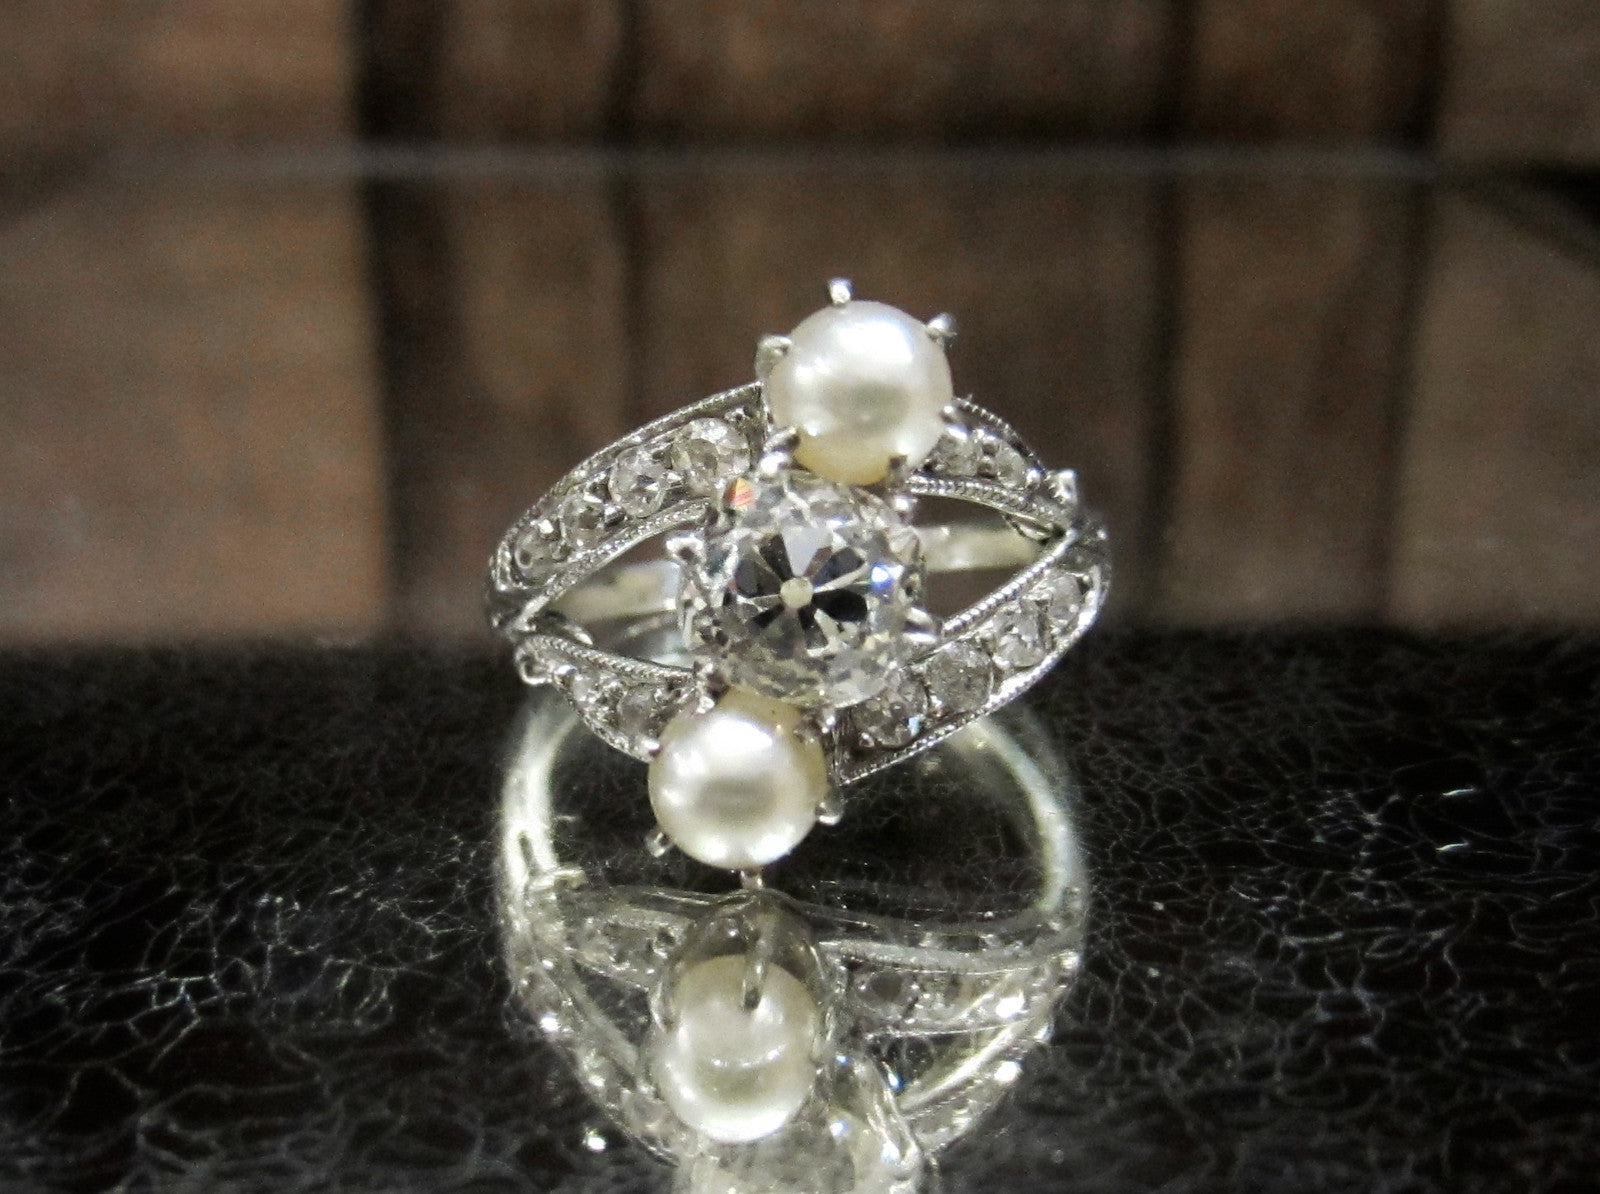 The Antique 1879 Split Pearl and Diamond Ring 